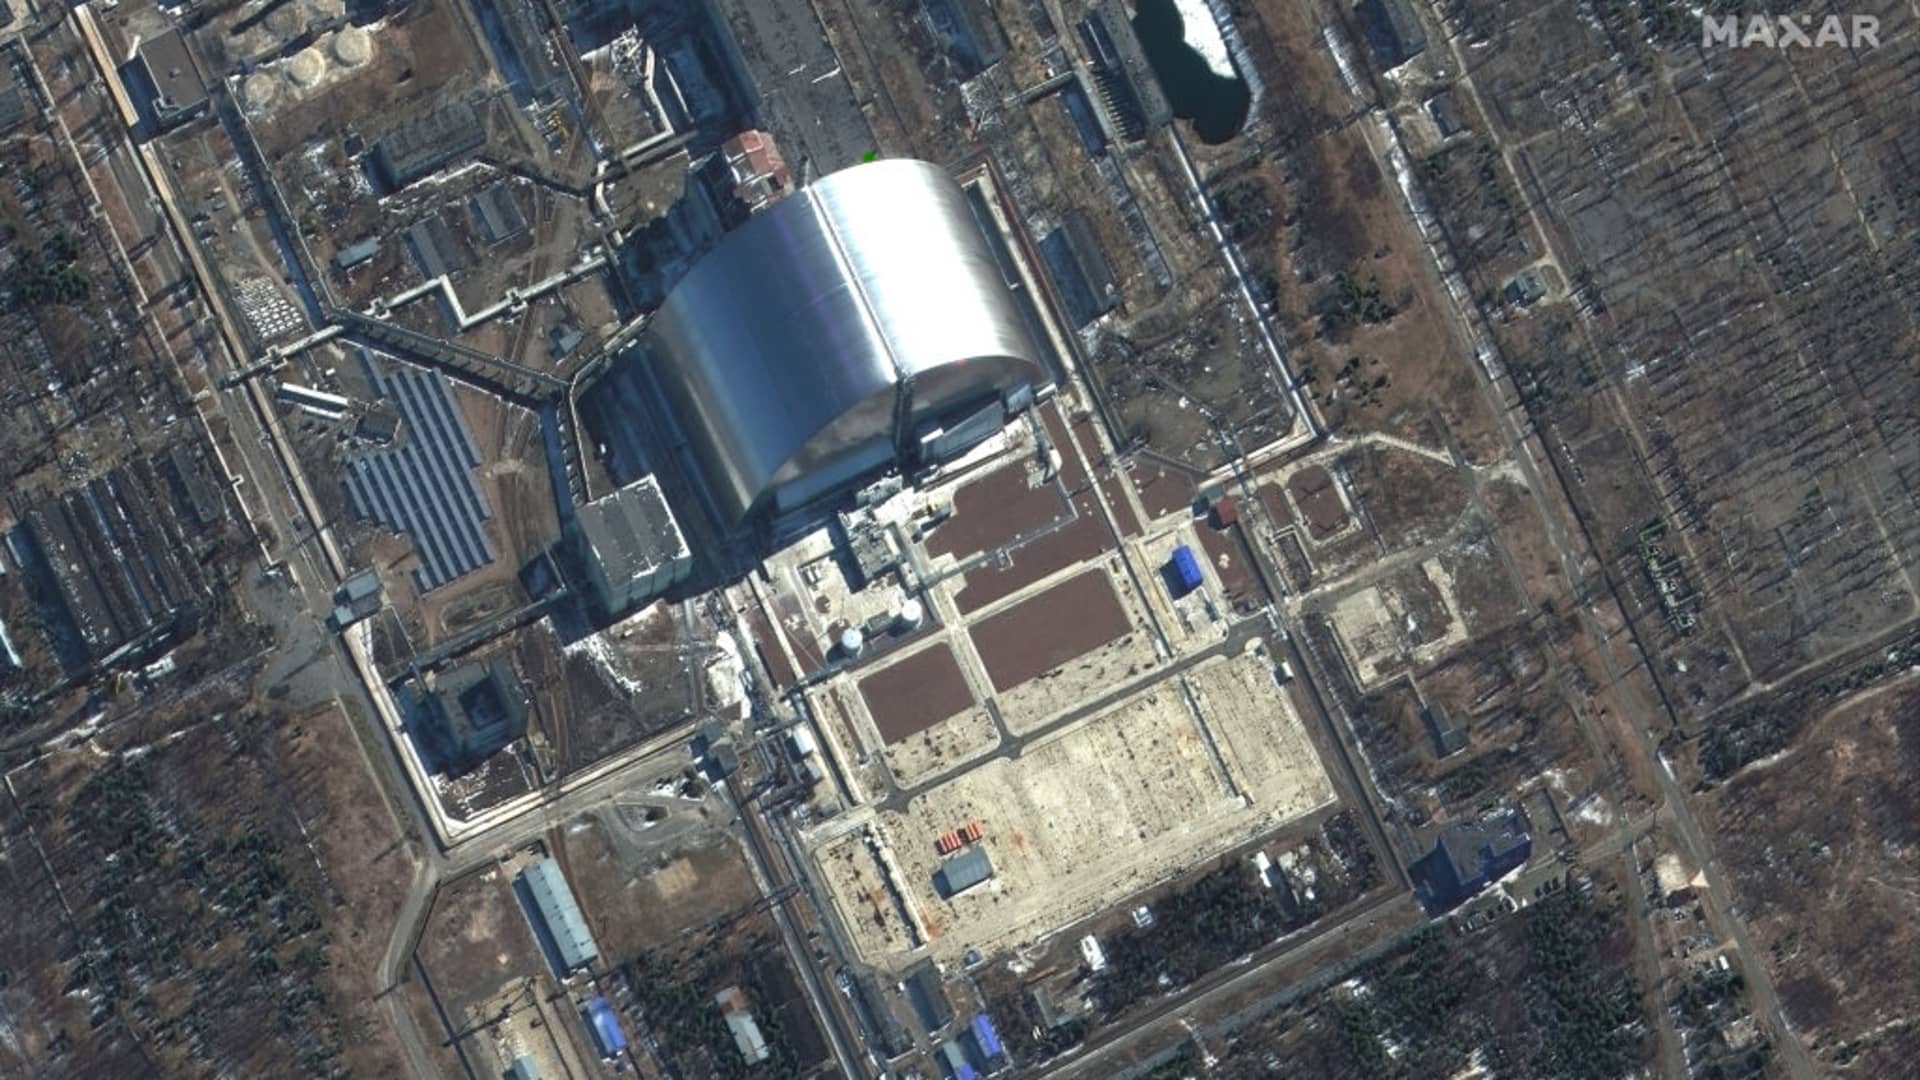 Maxar satellite imagery closeup of Chornobyl Nuclear Power Plant in Ukraine on March 10, 2022.